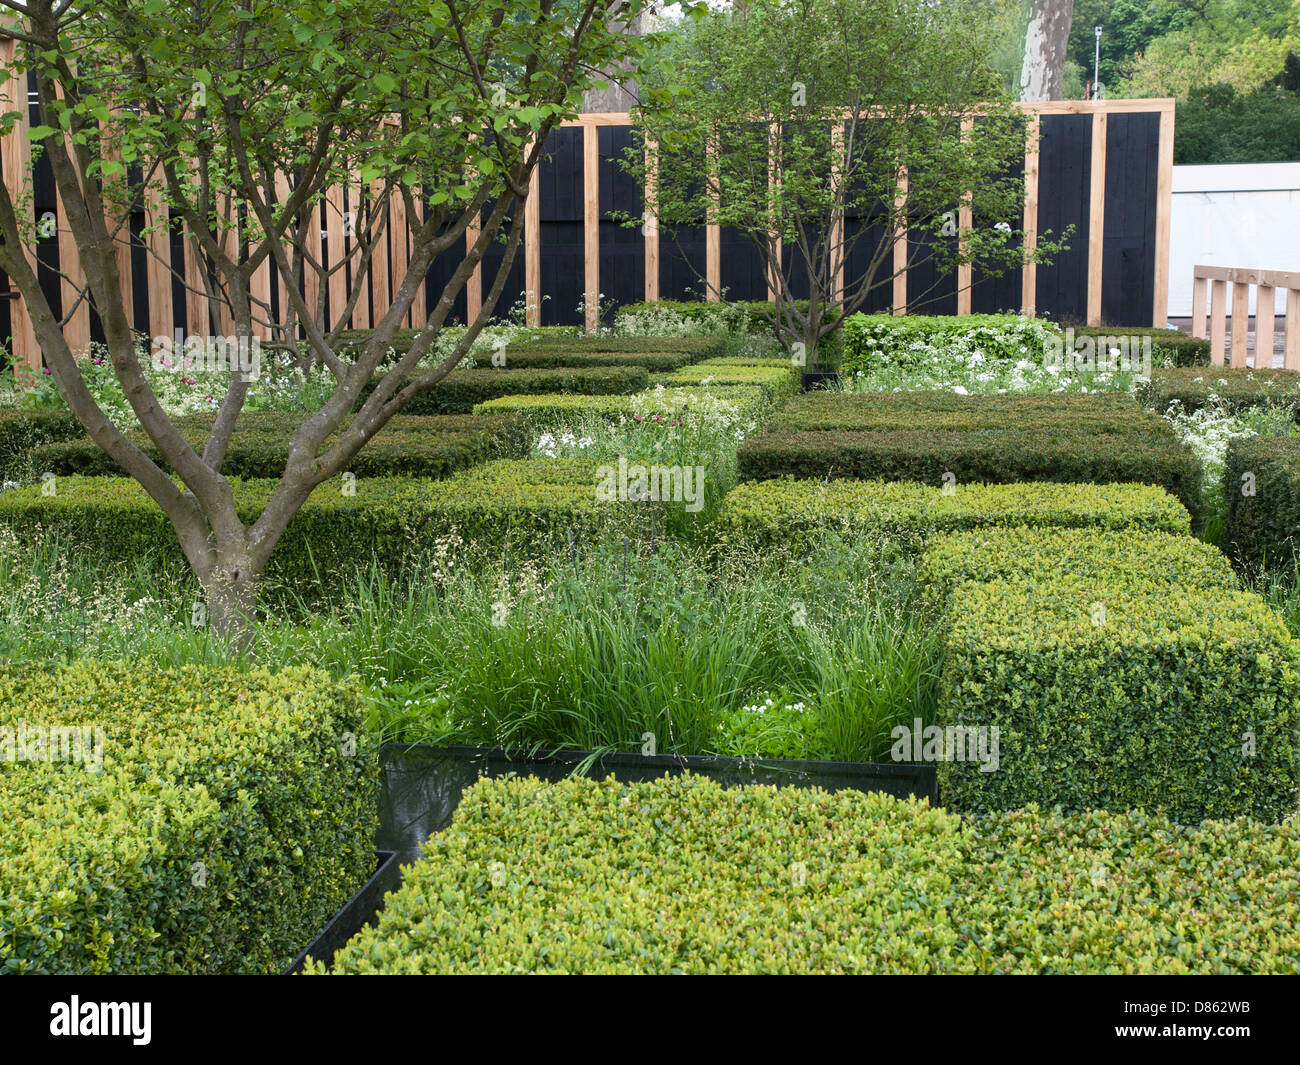 London, UK. 20th  May 2013. The Chelsea Flower Show. Pictured: The Daily Telegraph Garden. London, UK Credit: Ian Thwaites/Alamy Live News Stock Photo